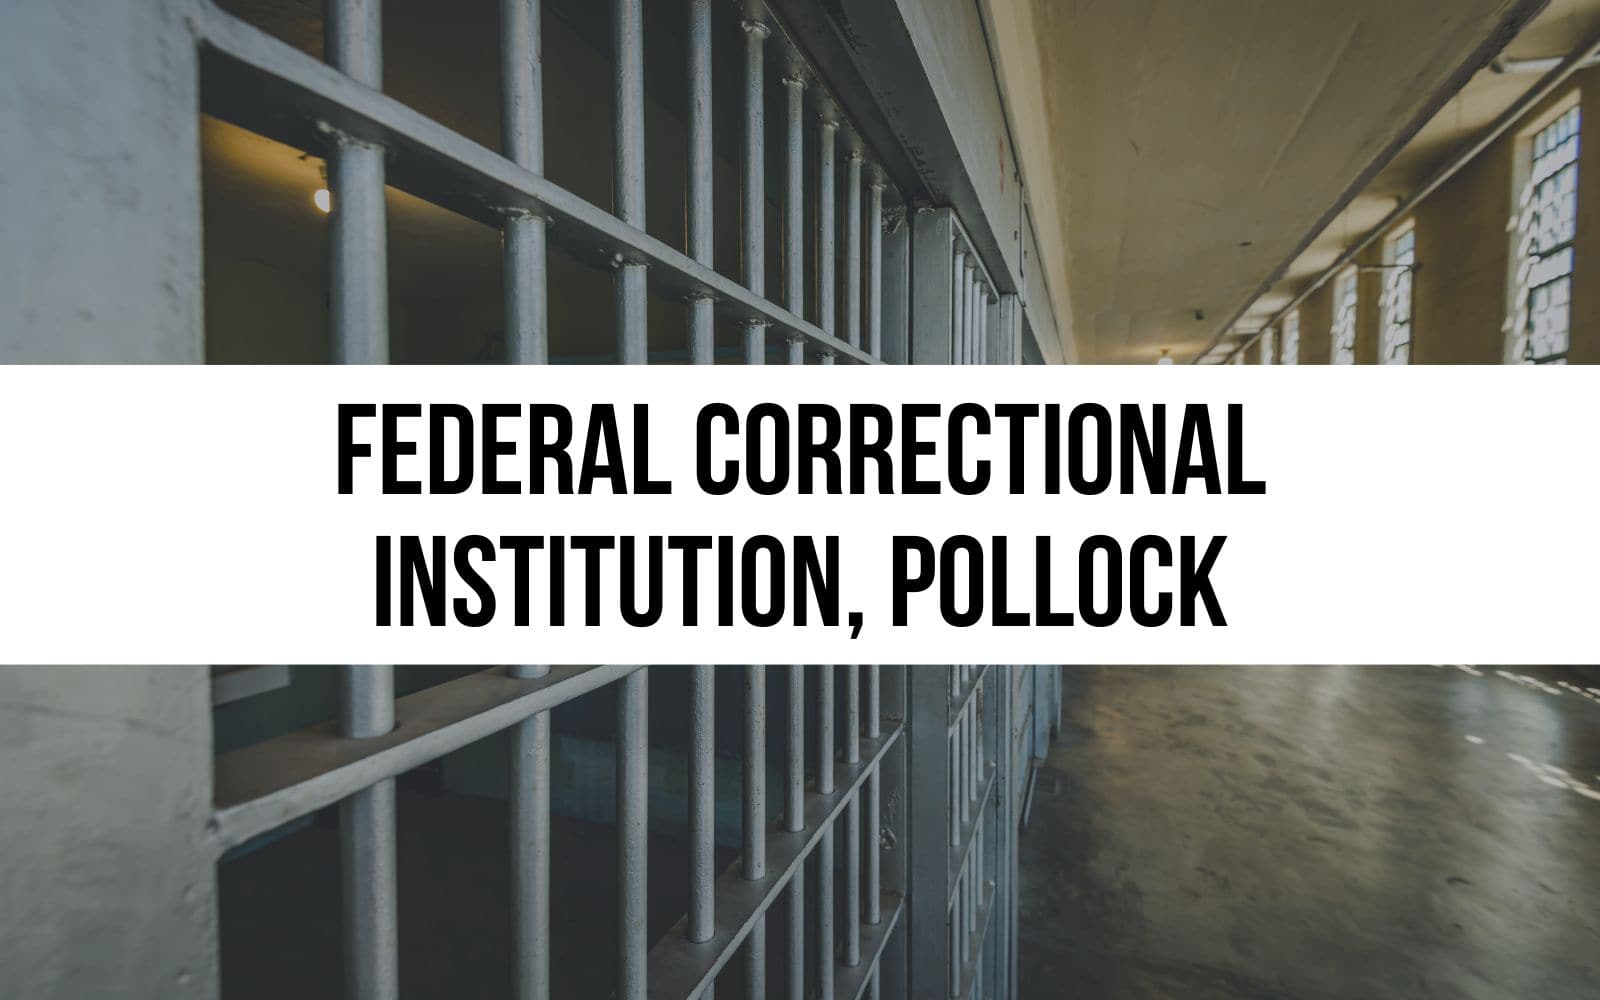 Federal Correctional Institution, Pollock